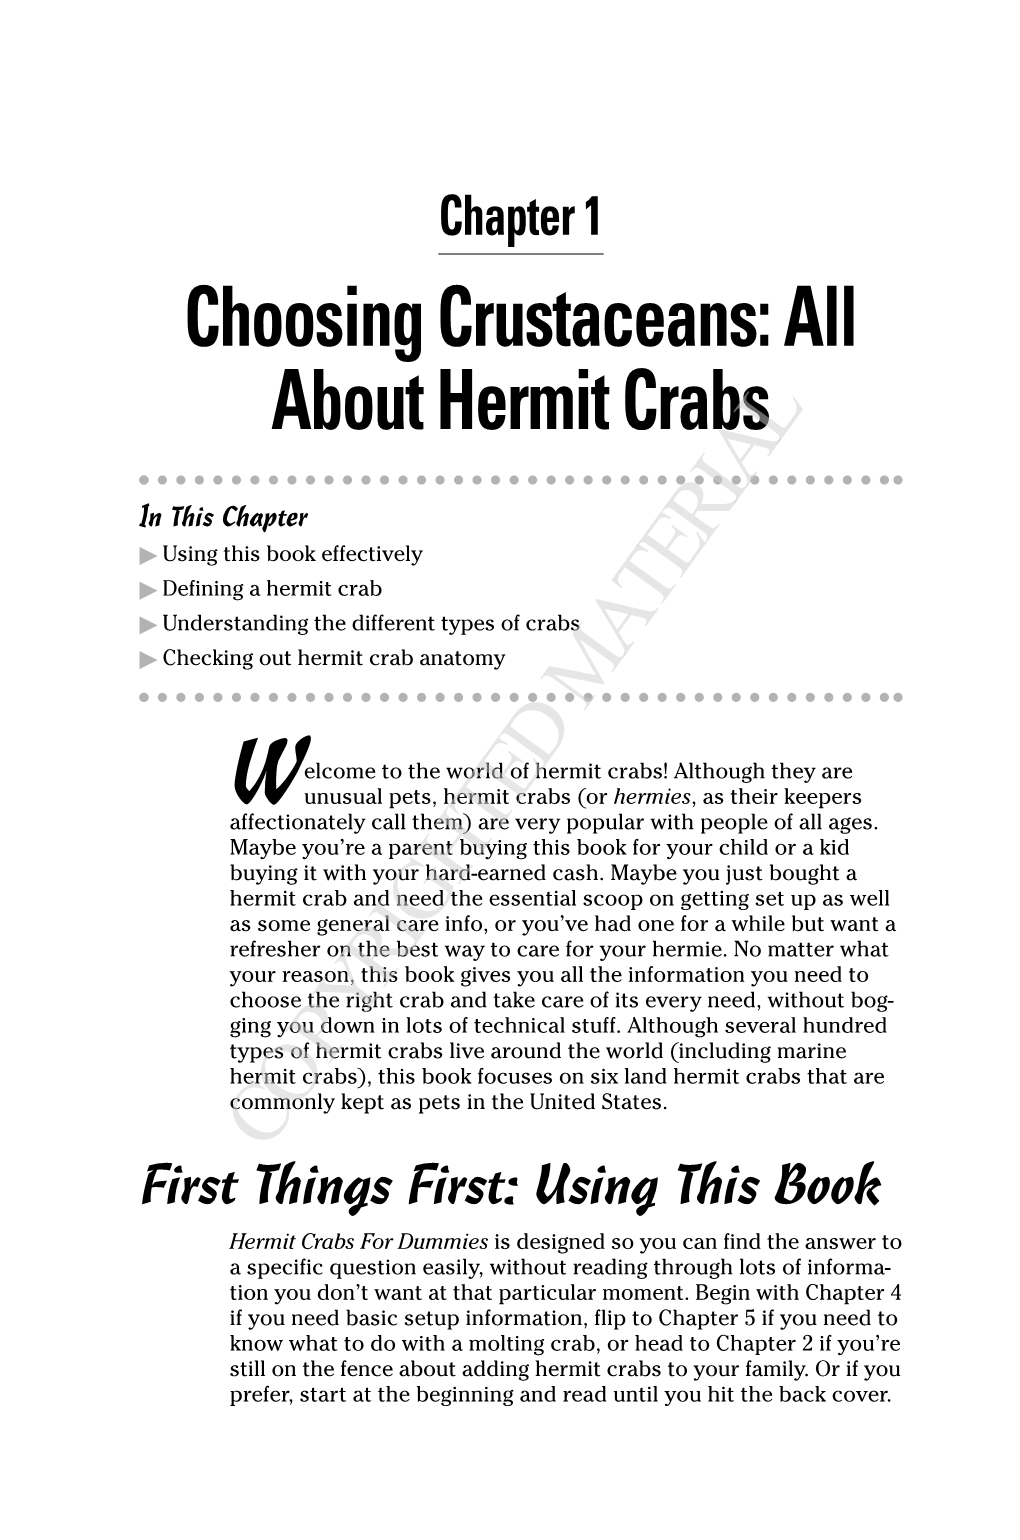 Choosing Crustaceans: All About Hermit Crabs